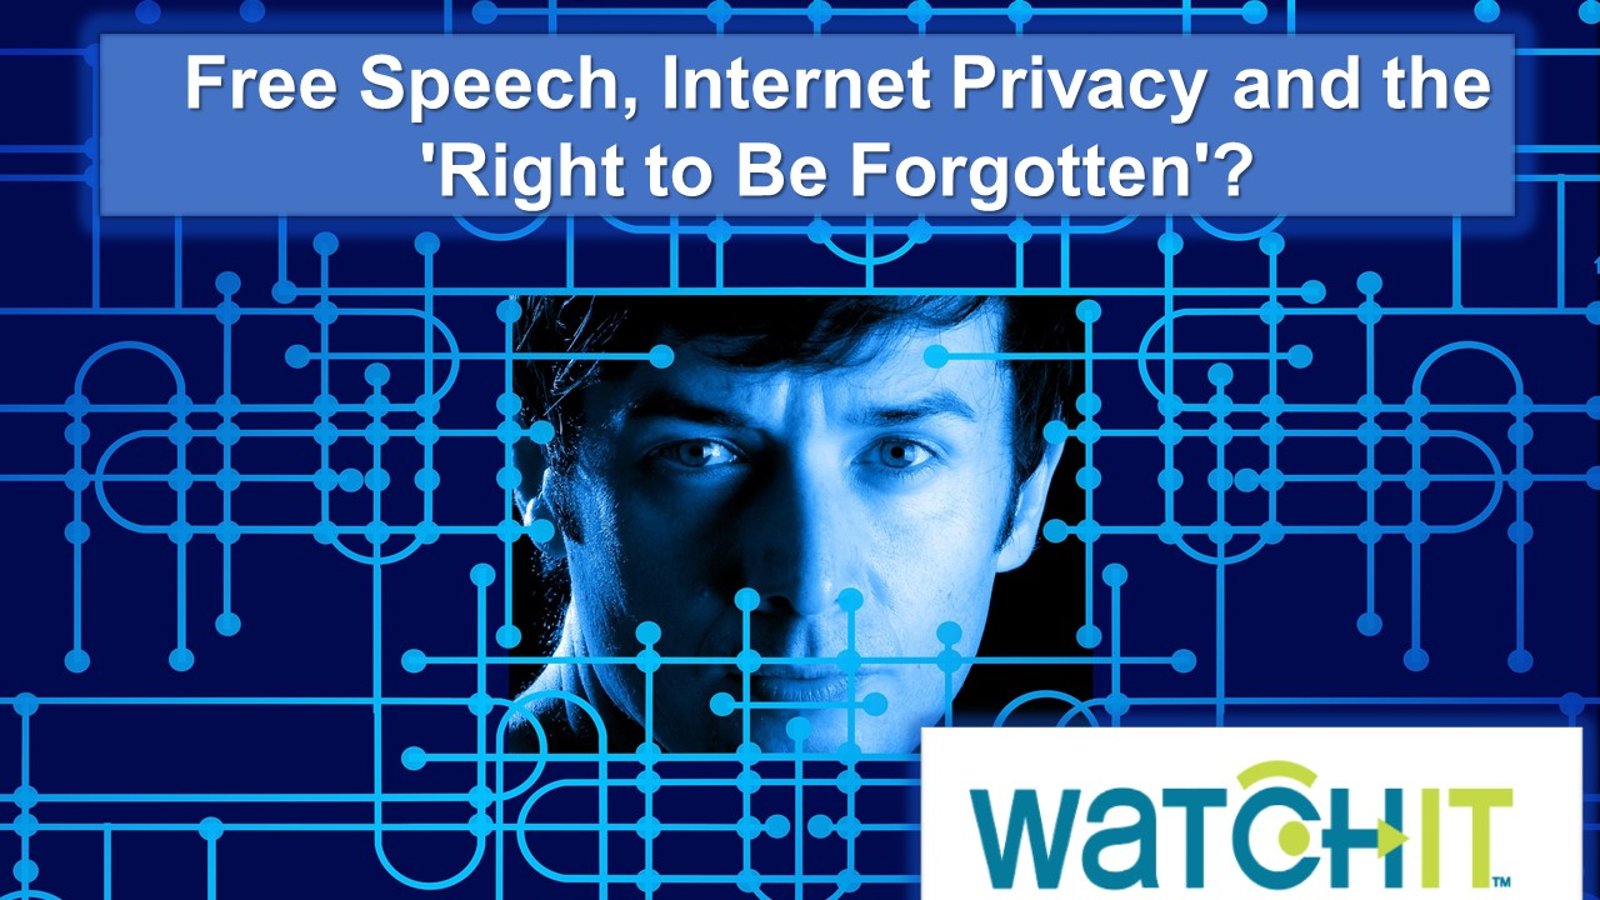 Free Speech, Internet Privacy and the 'Right to Be Forgotten' - Advancing the Management Skills of IT Professionals